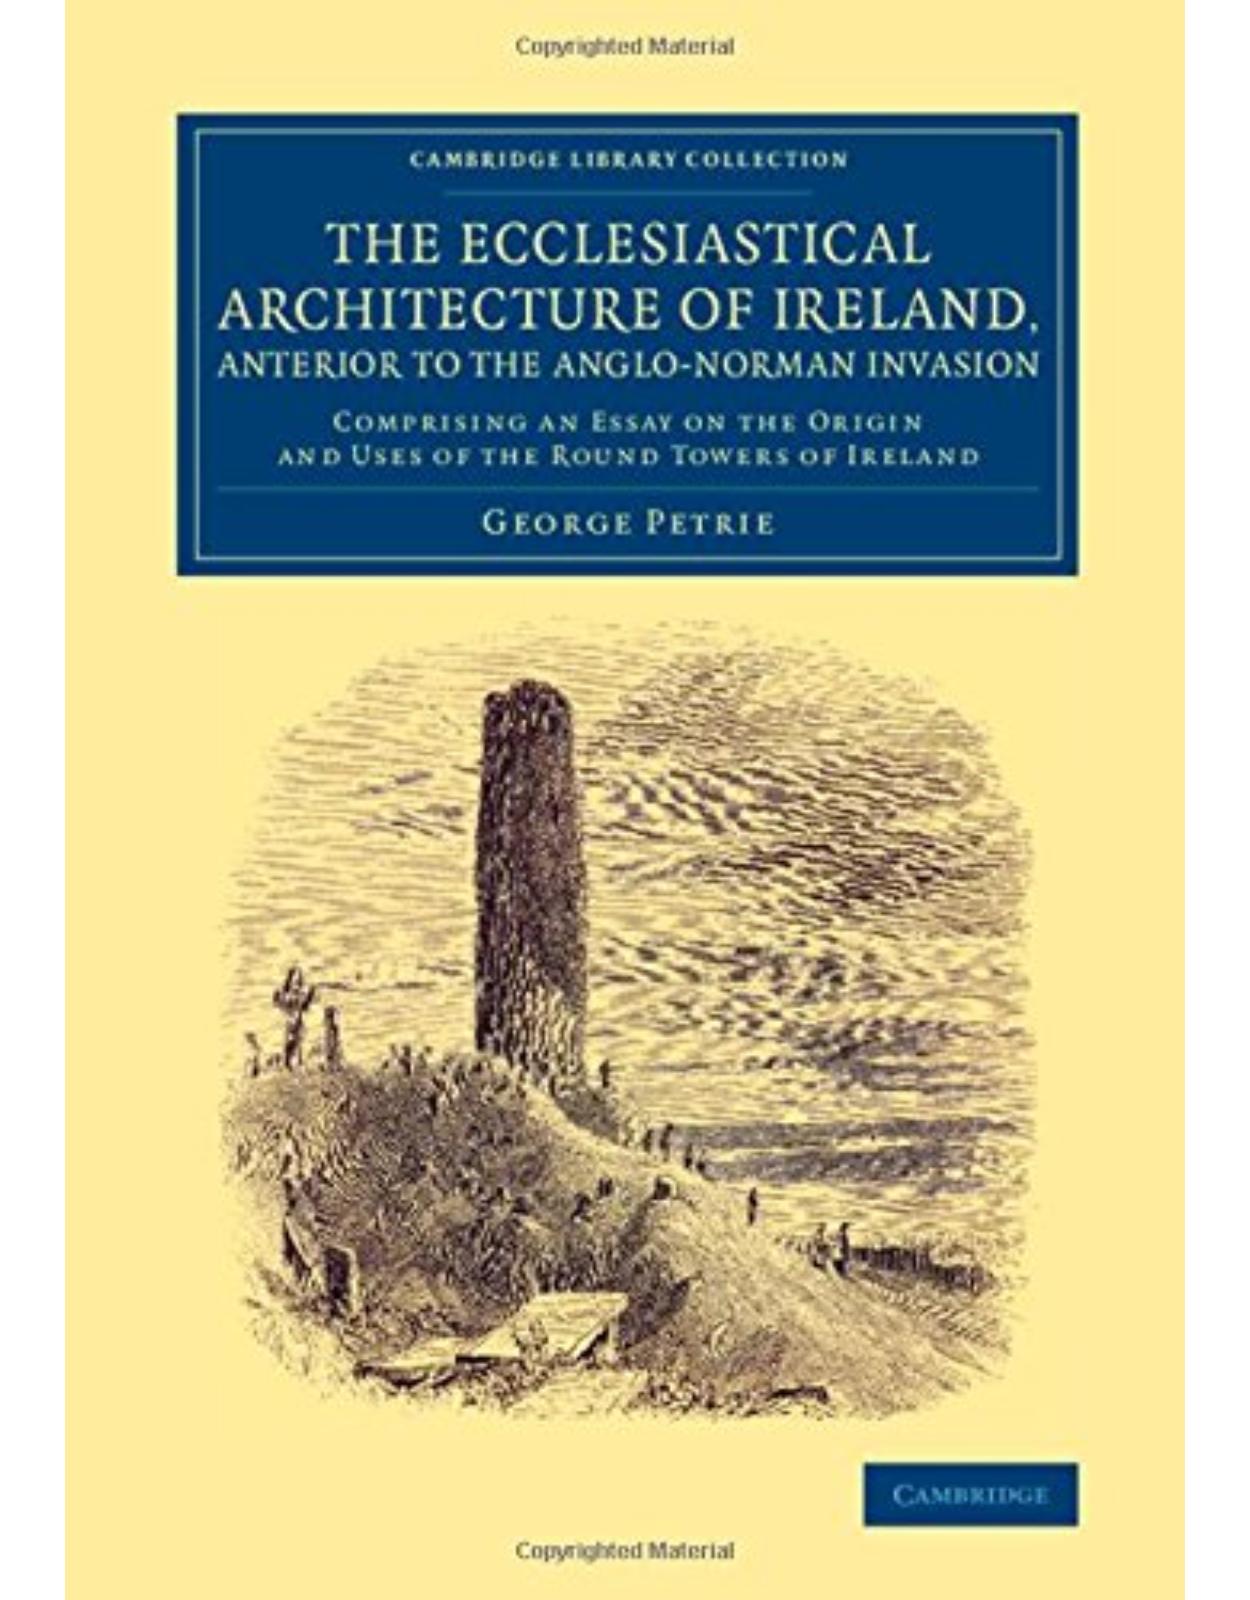 The Ecclesiastical Architecture of Ireland, Anterior to the Anglo-Norman Invasion: Comprising an Essay on the Origin and Uses of the Round Towers of ... (Cambridge Library Collection - Archaeology)